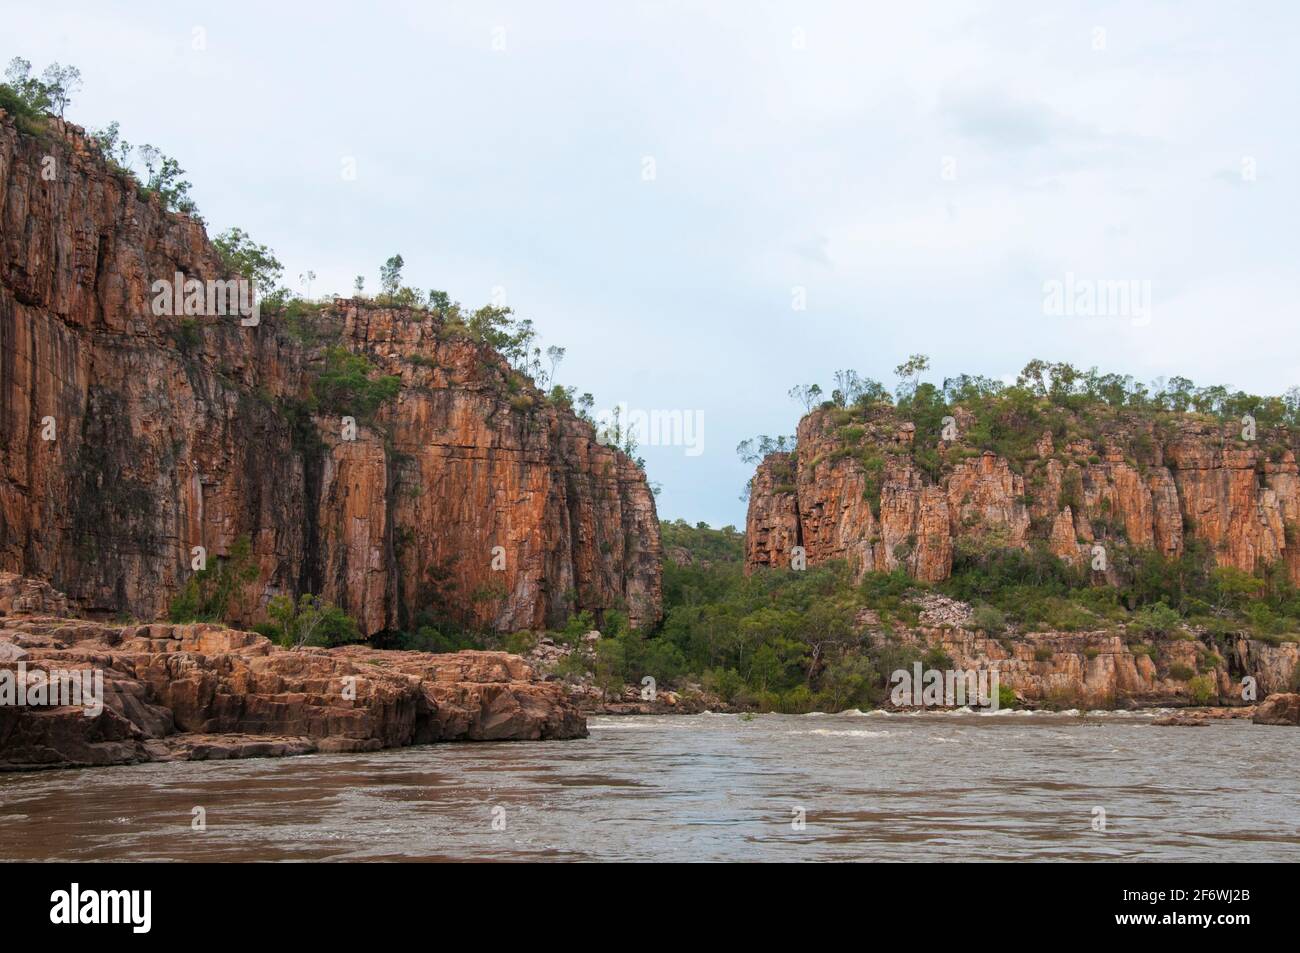 Upper reaches of the First Gorge at Nitmiluk (Katherine) Gorge late in the Wet Season, Katherine, Northern Territory, Australia Stock Photo